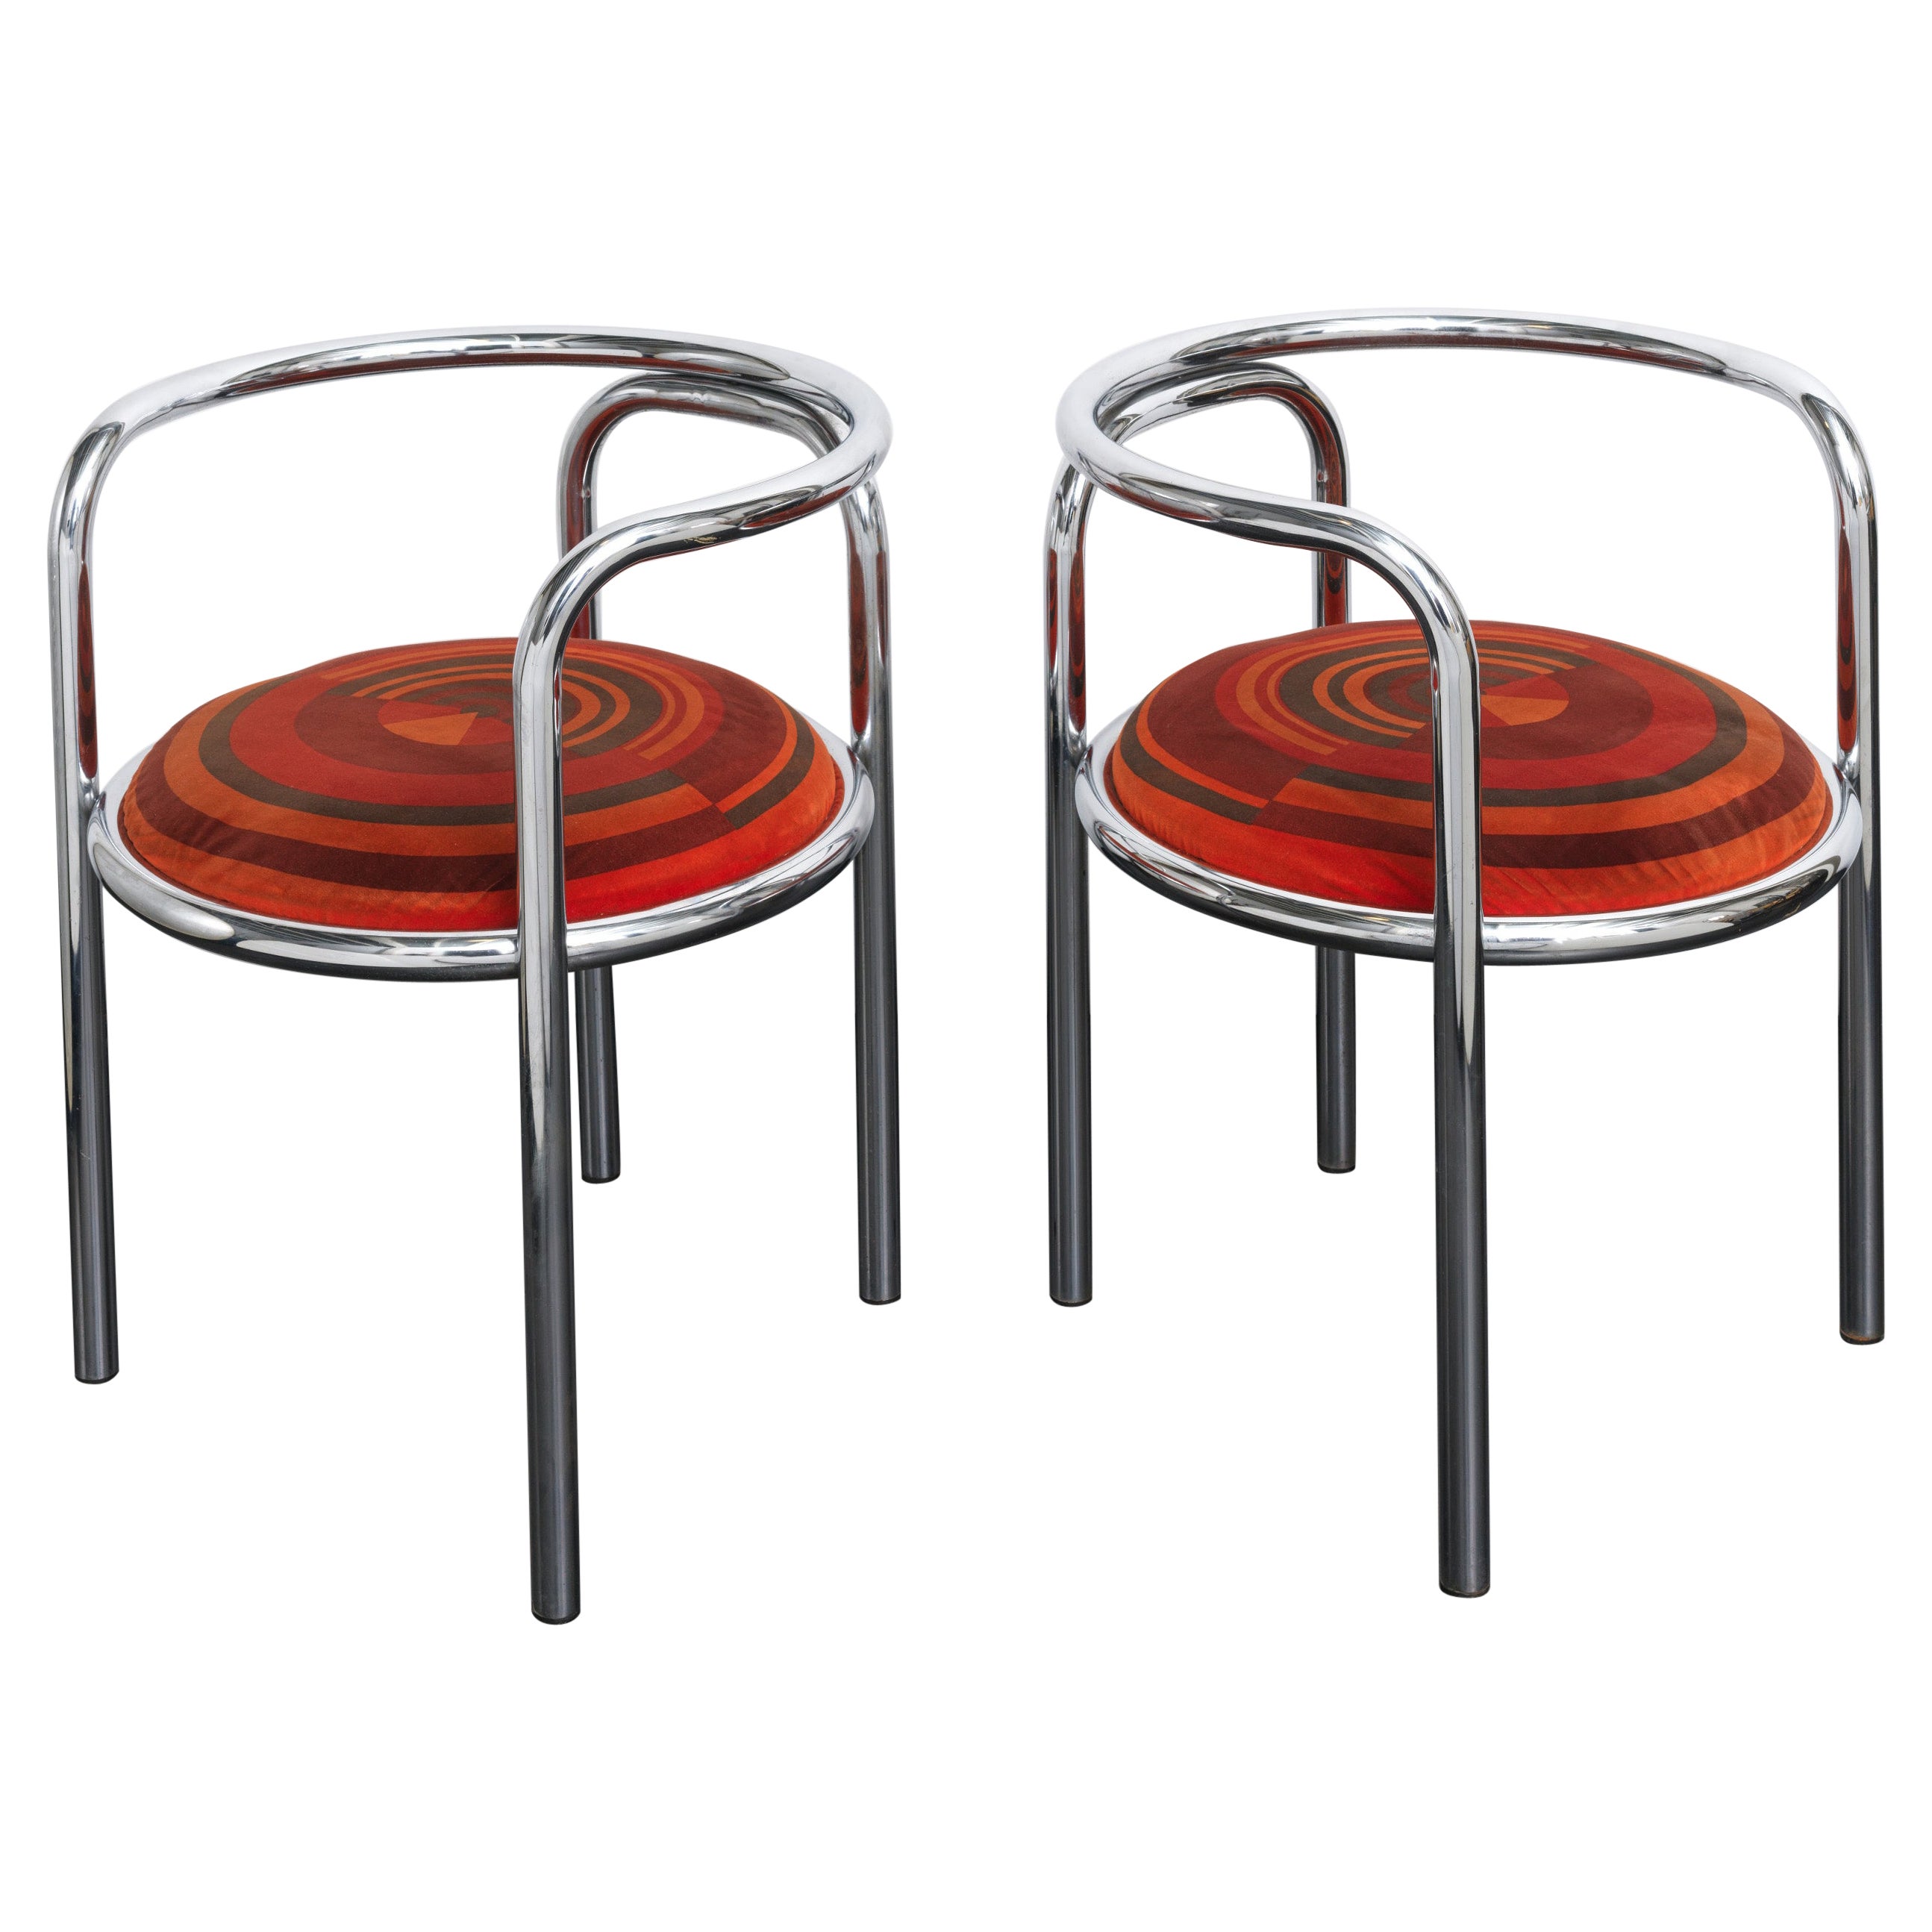 Pair of Rare, Early Edition ‘Locus Solus’ Chairs by Gae Aulenti, 1964